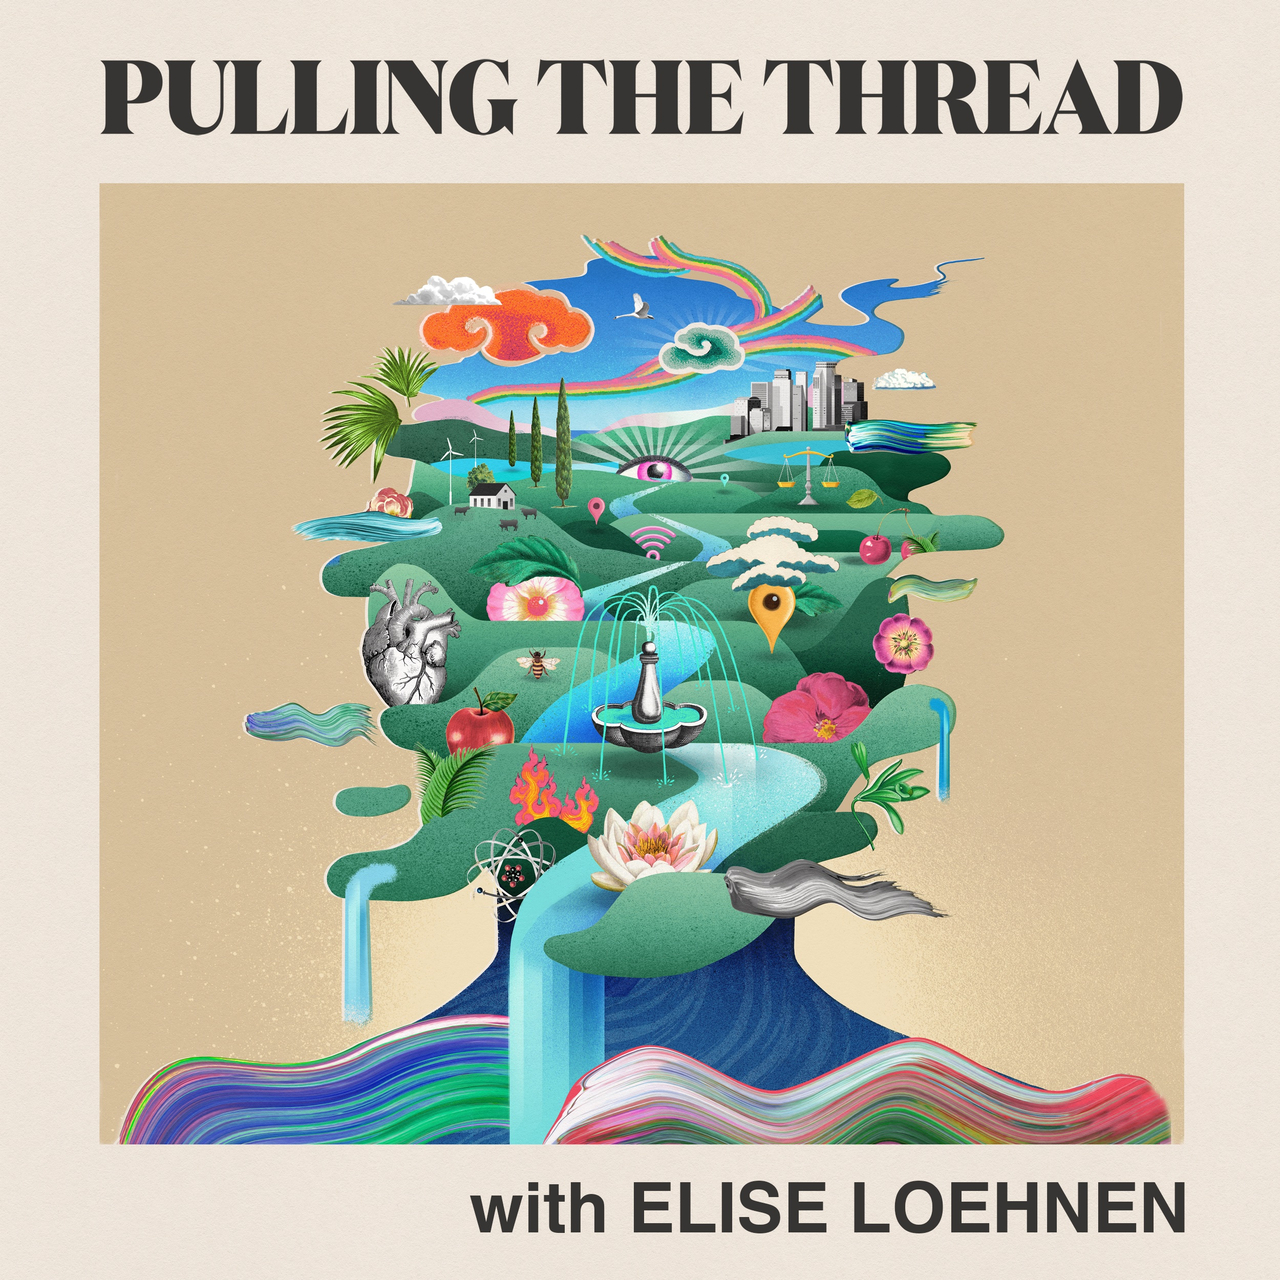 Pulling the Thread with Elise Loehnen